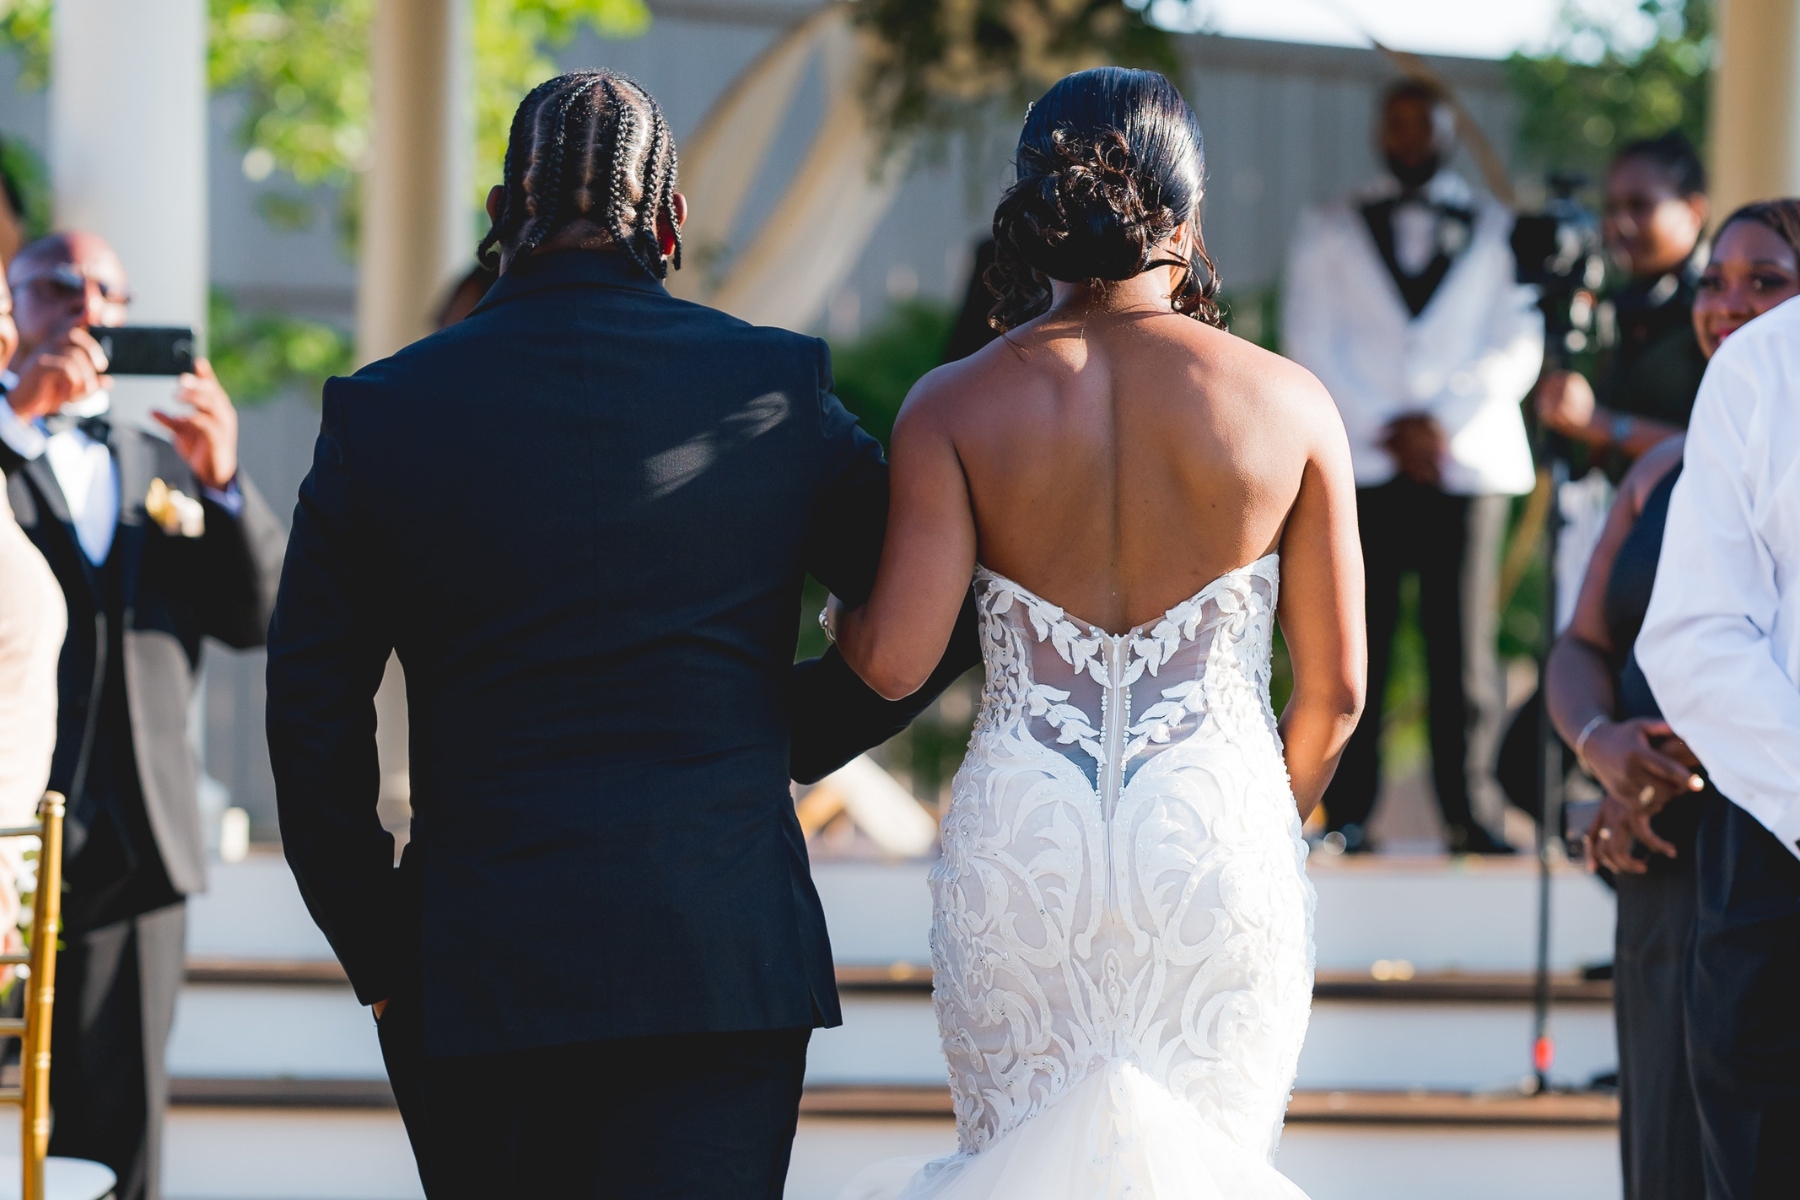 The back of a Black man with cornrows and a Black bride in a strapless wedding gown walking down the aisle